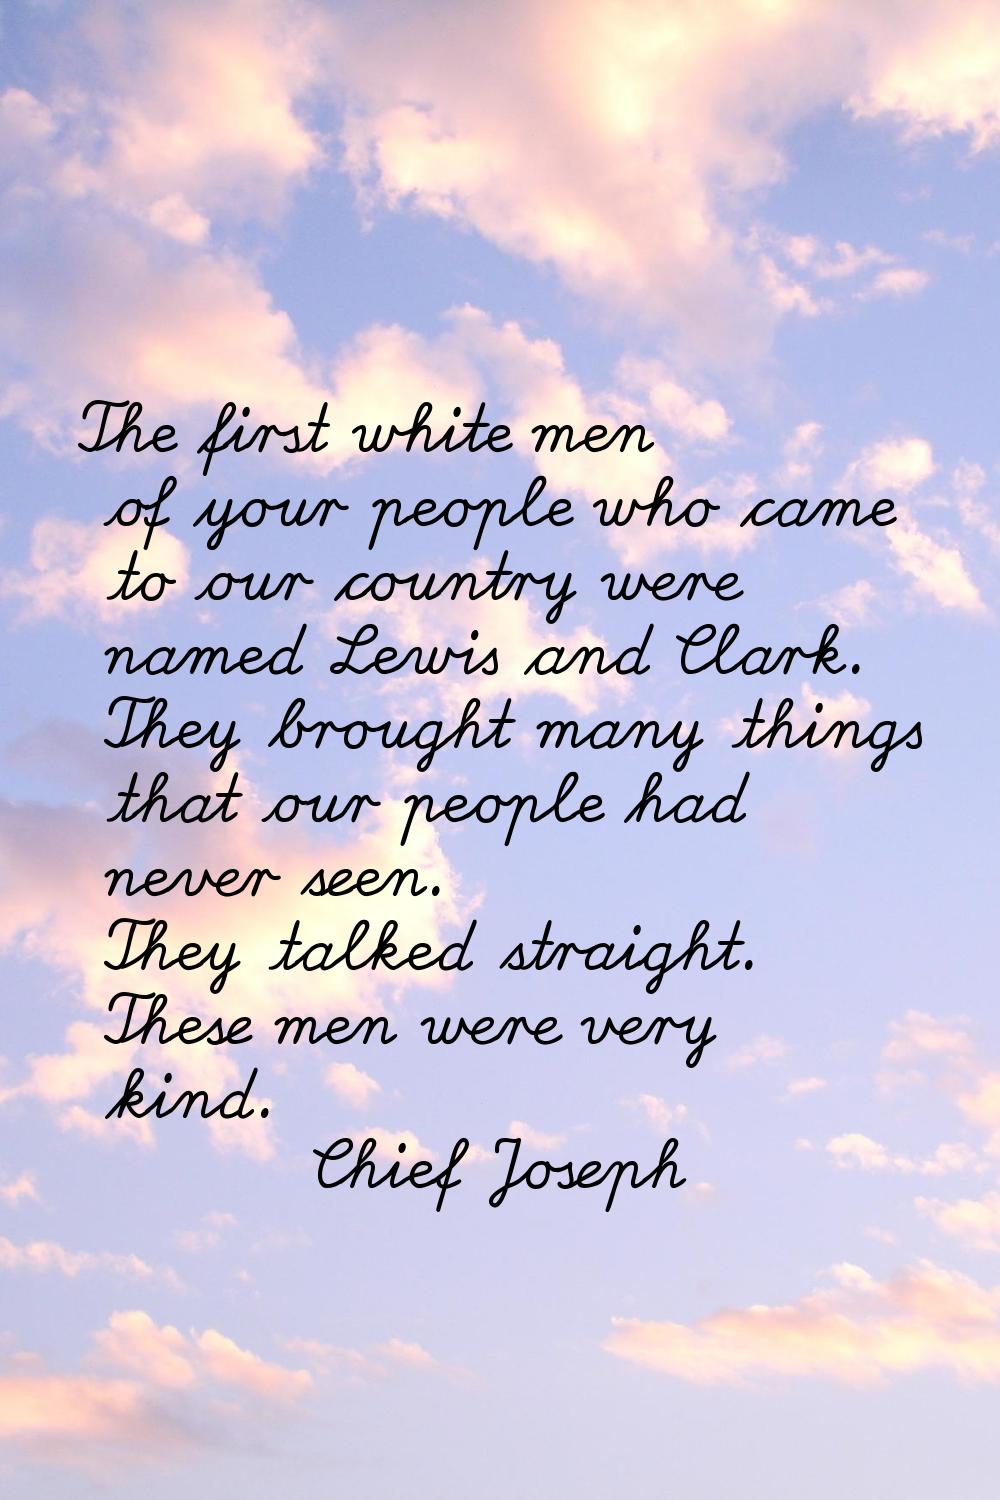 The first white men of your people who came to our country were named Lewis and Clark. They brought